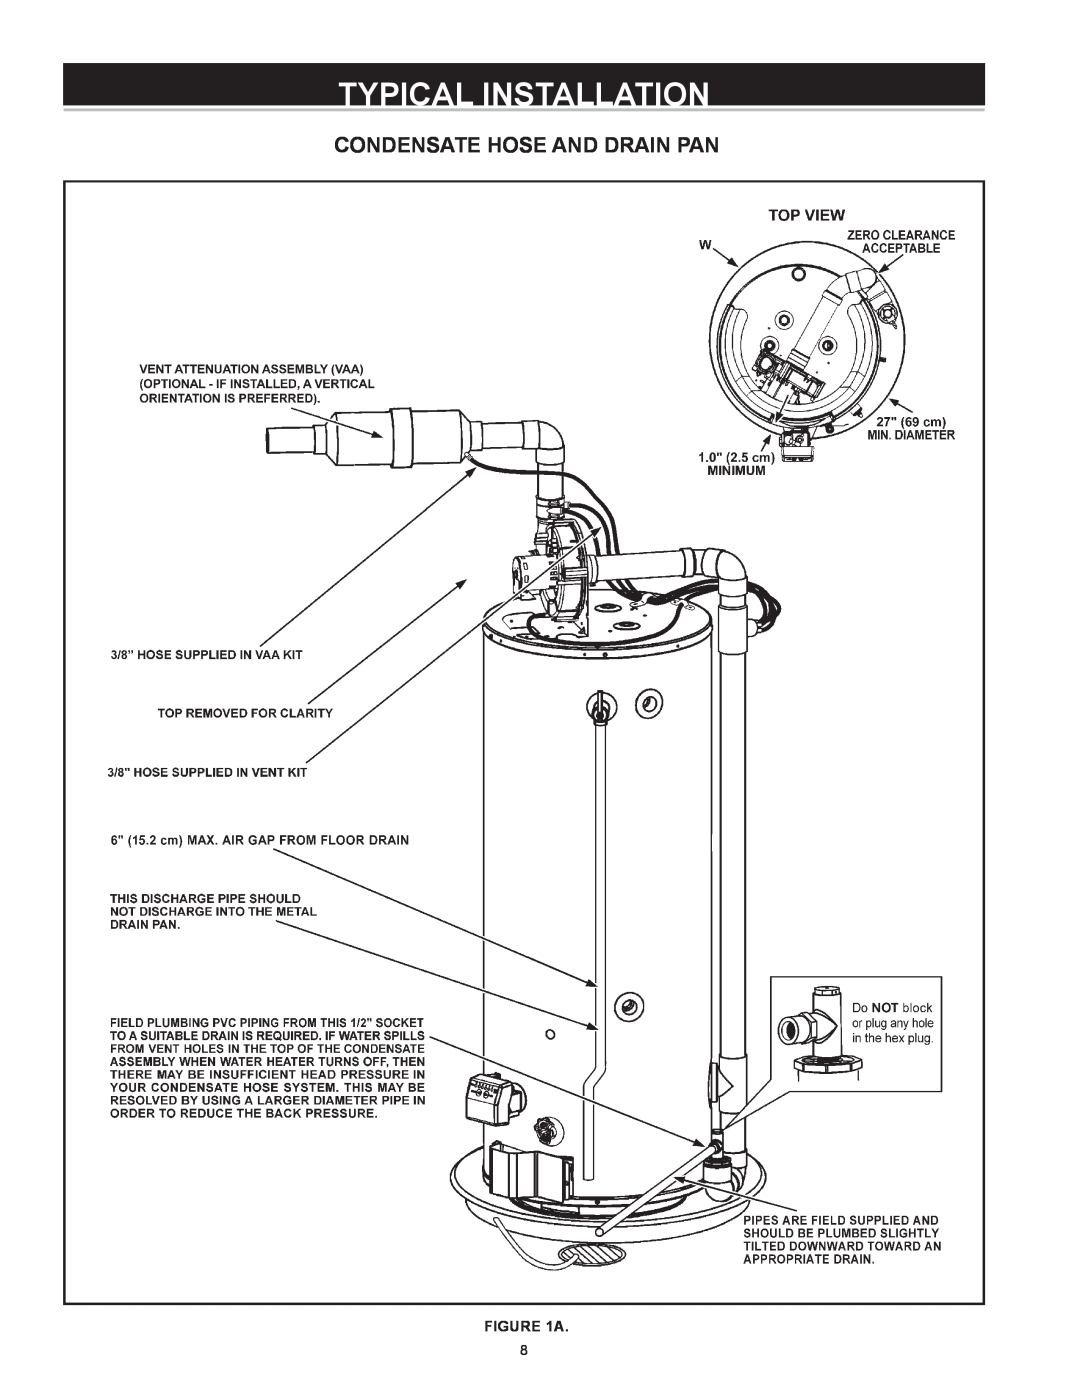 American Water Heater VG6250T76NV Series 100 instruction manual Condensate Hose And Drain Pan, Typical Installation 